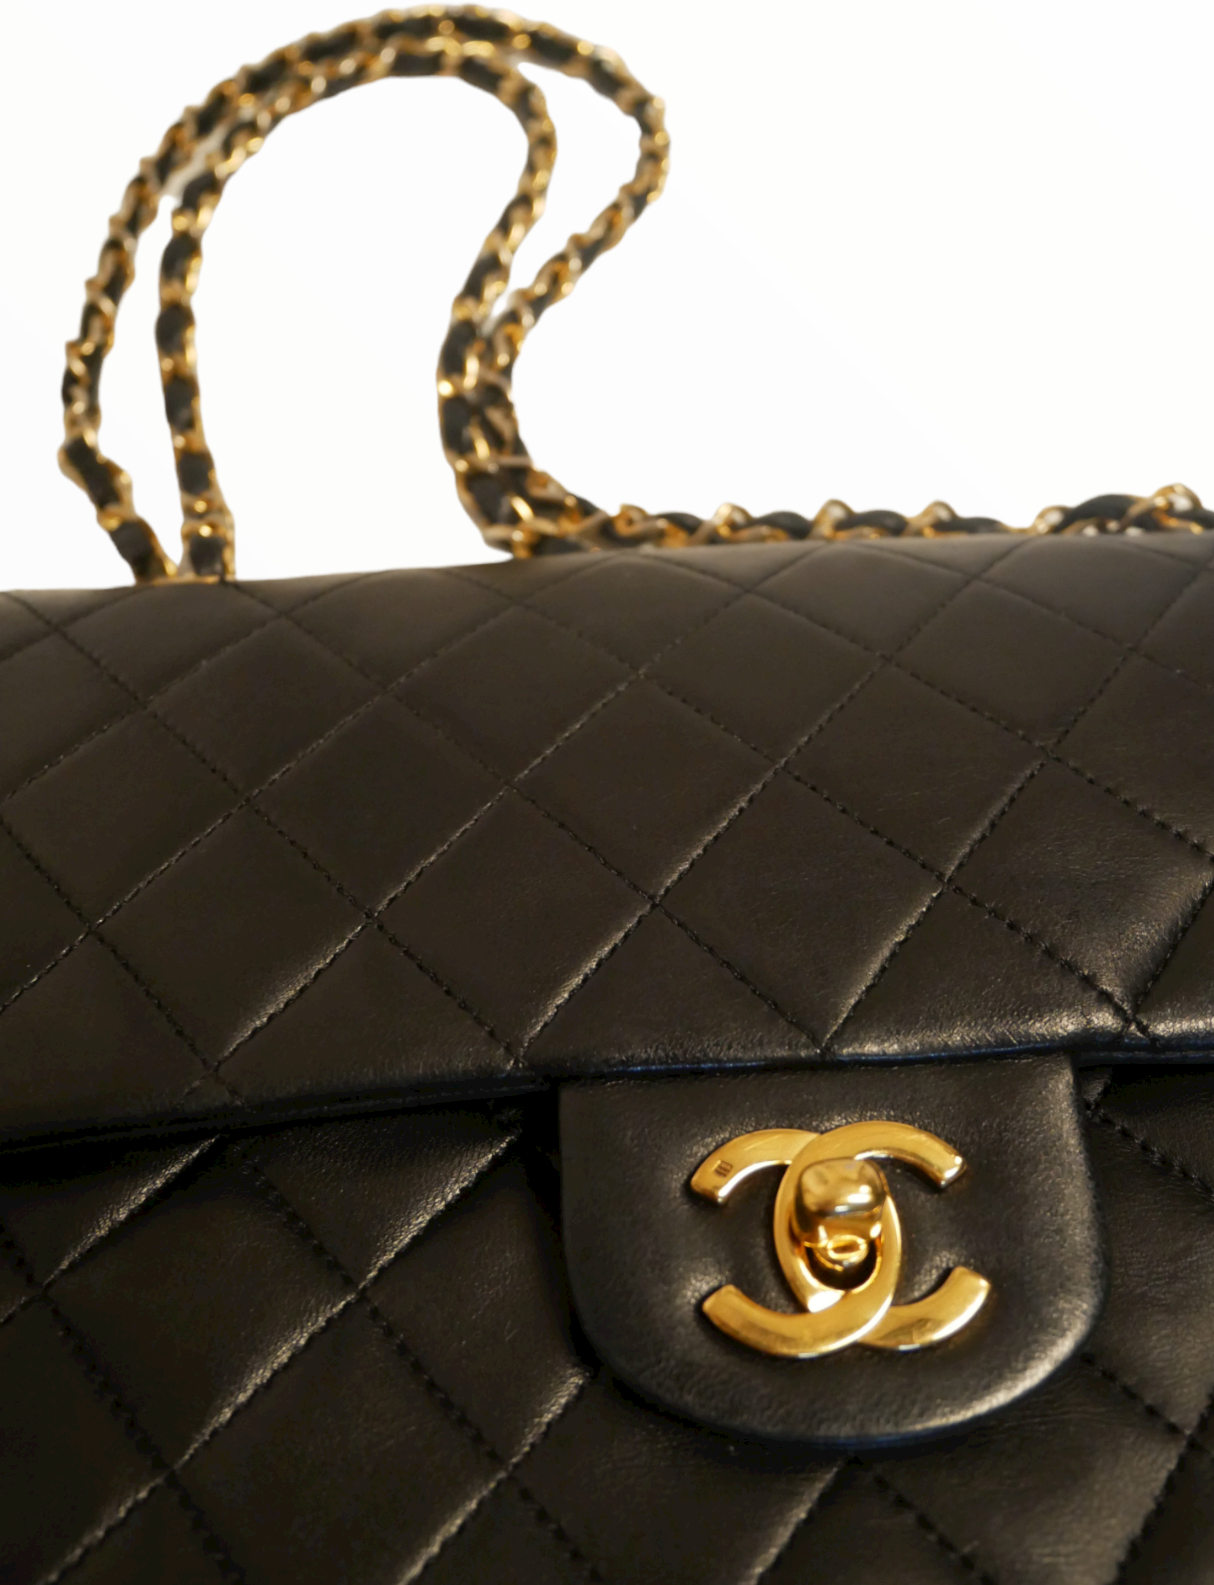 Second Hand Chanel Bags  buy Preowned at Tabitabags store  Tabita Bags  with Love